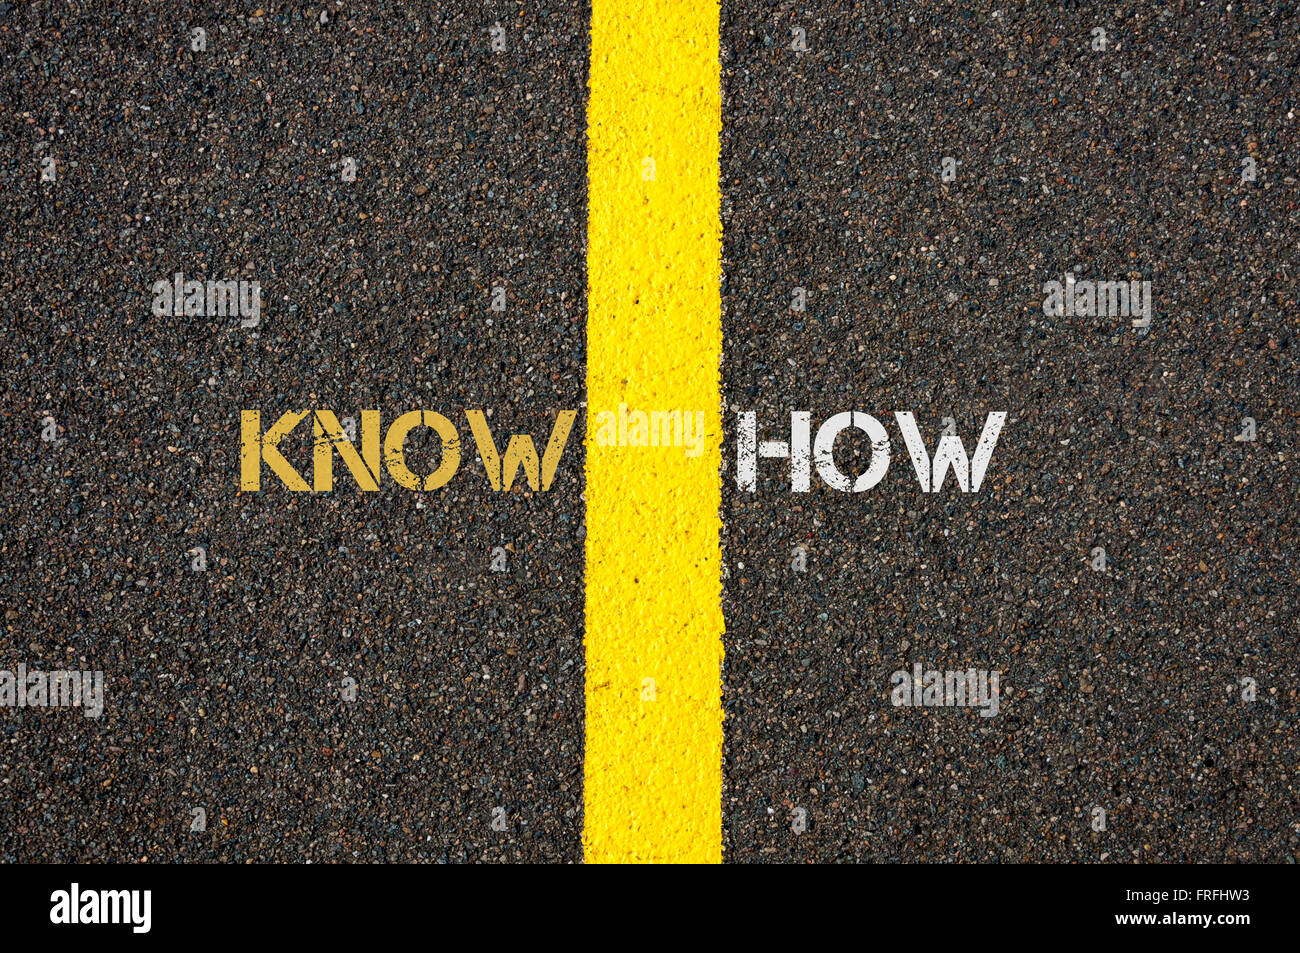 Road marking yellow paint dividing line between KNOW and HOW as word KNOWHOW, business concept Stock Photo